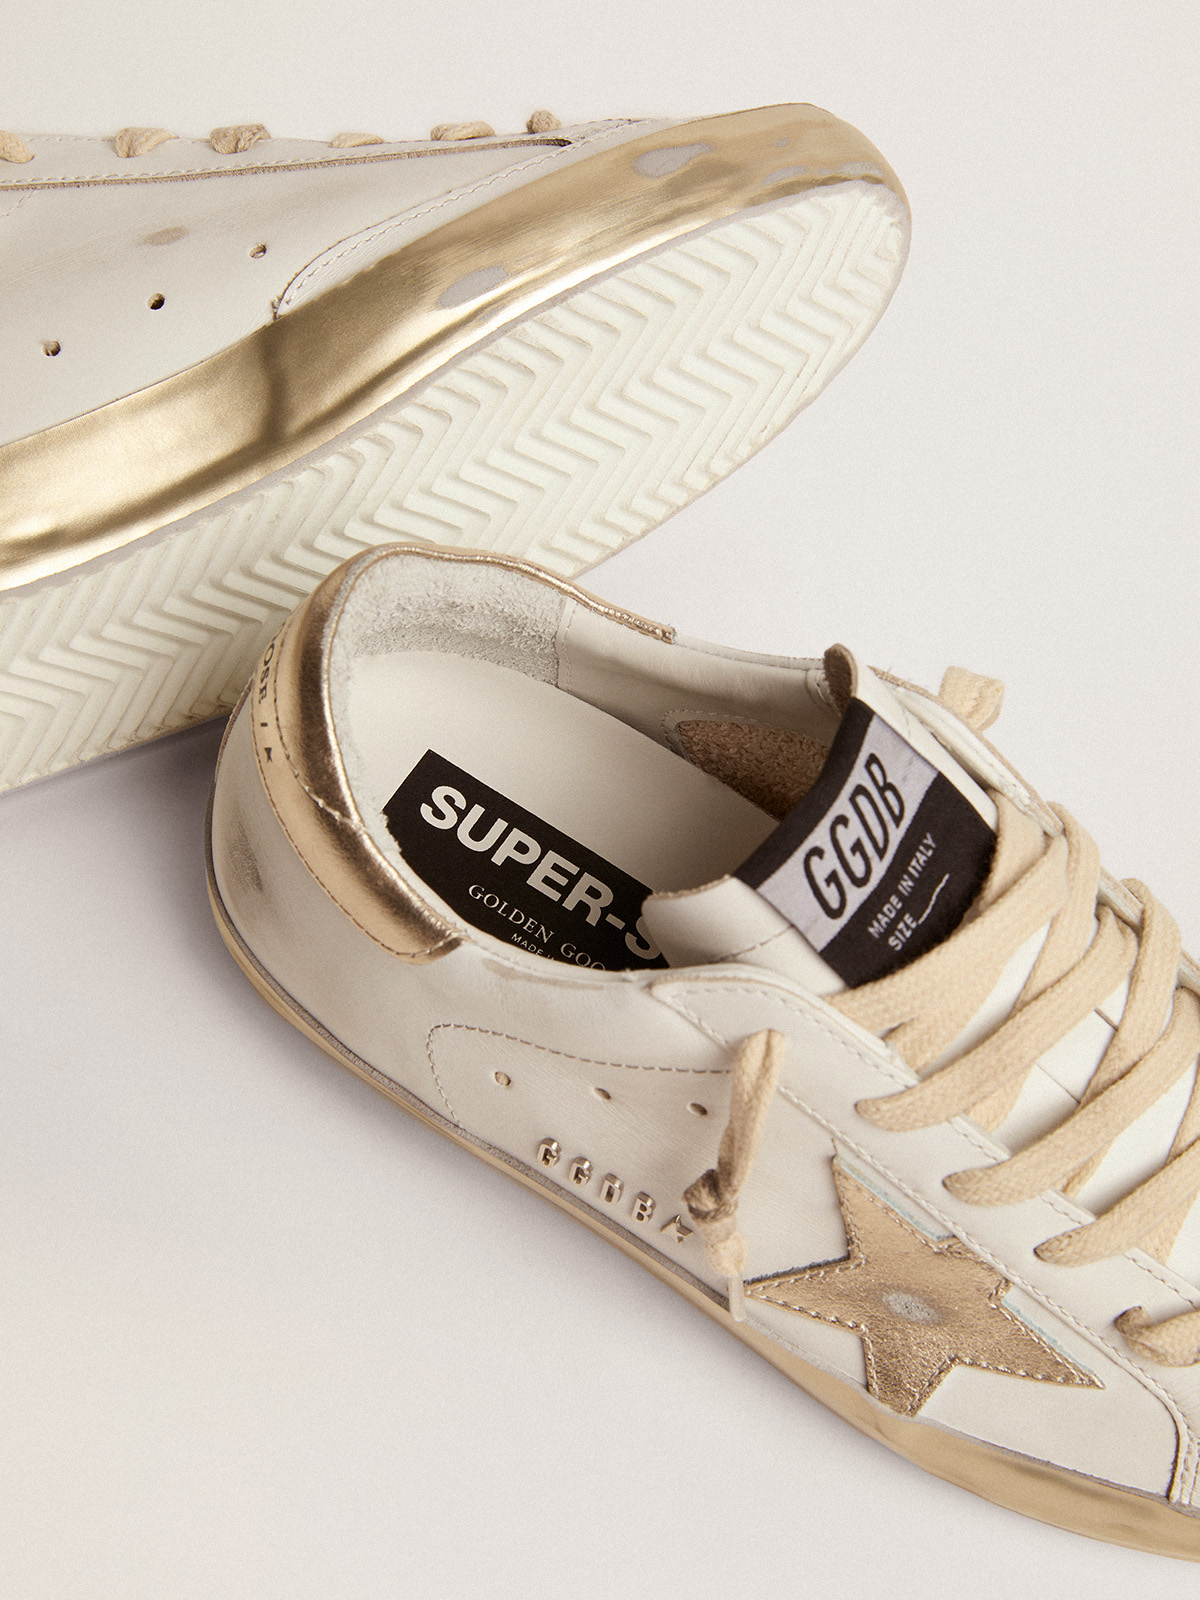 Women S Super Star Sneakers With Gold Foxing Golden Goose